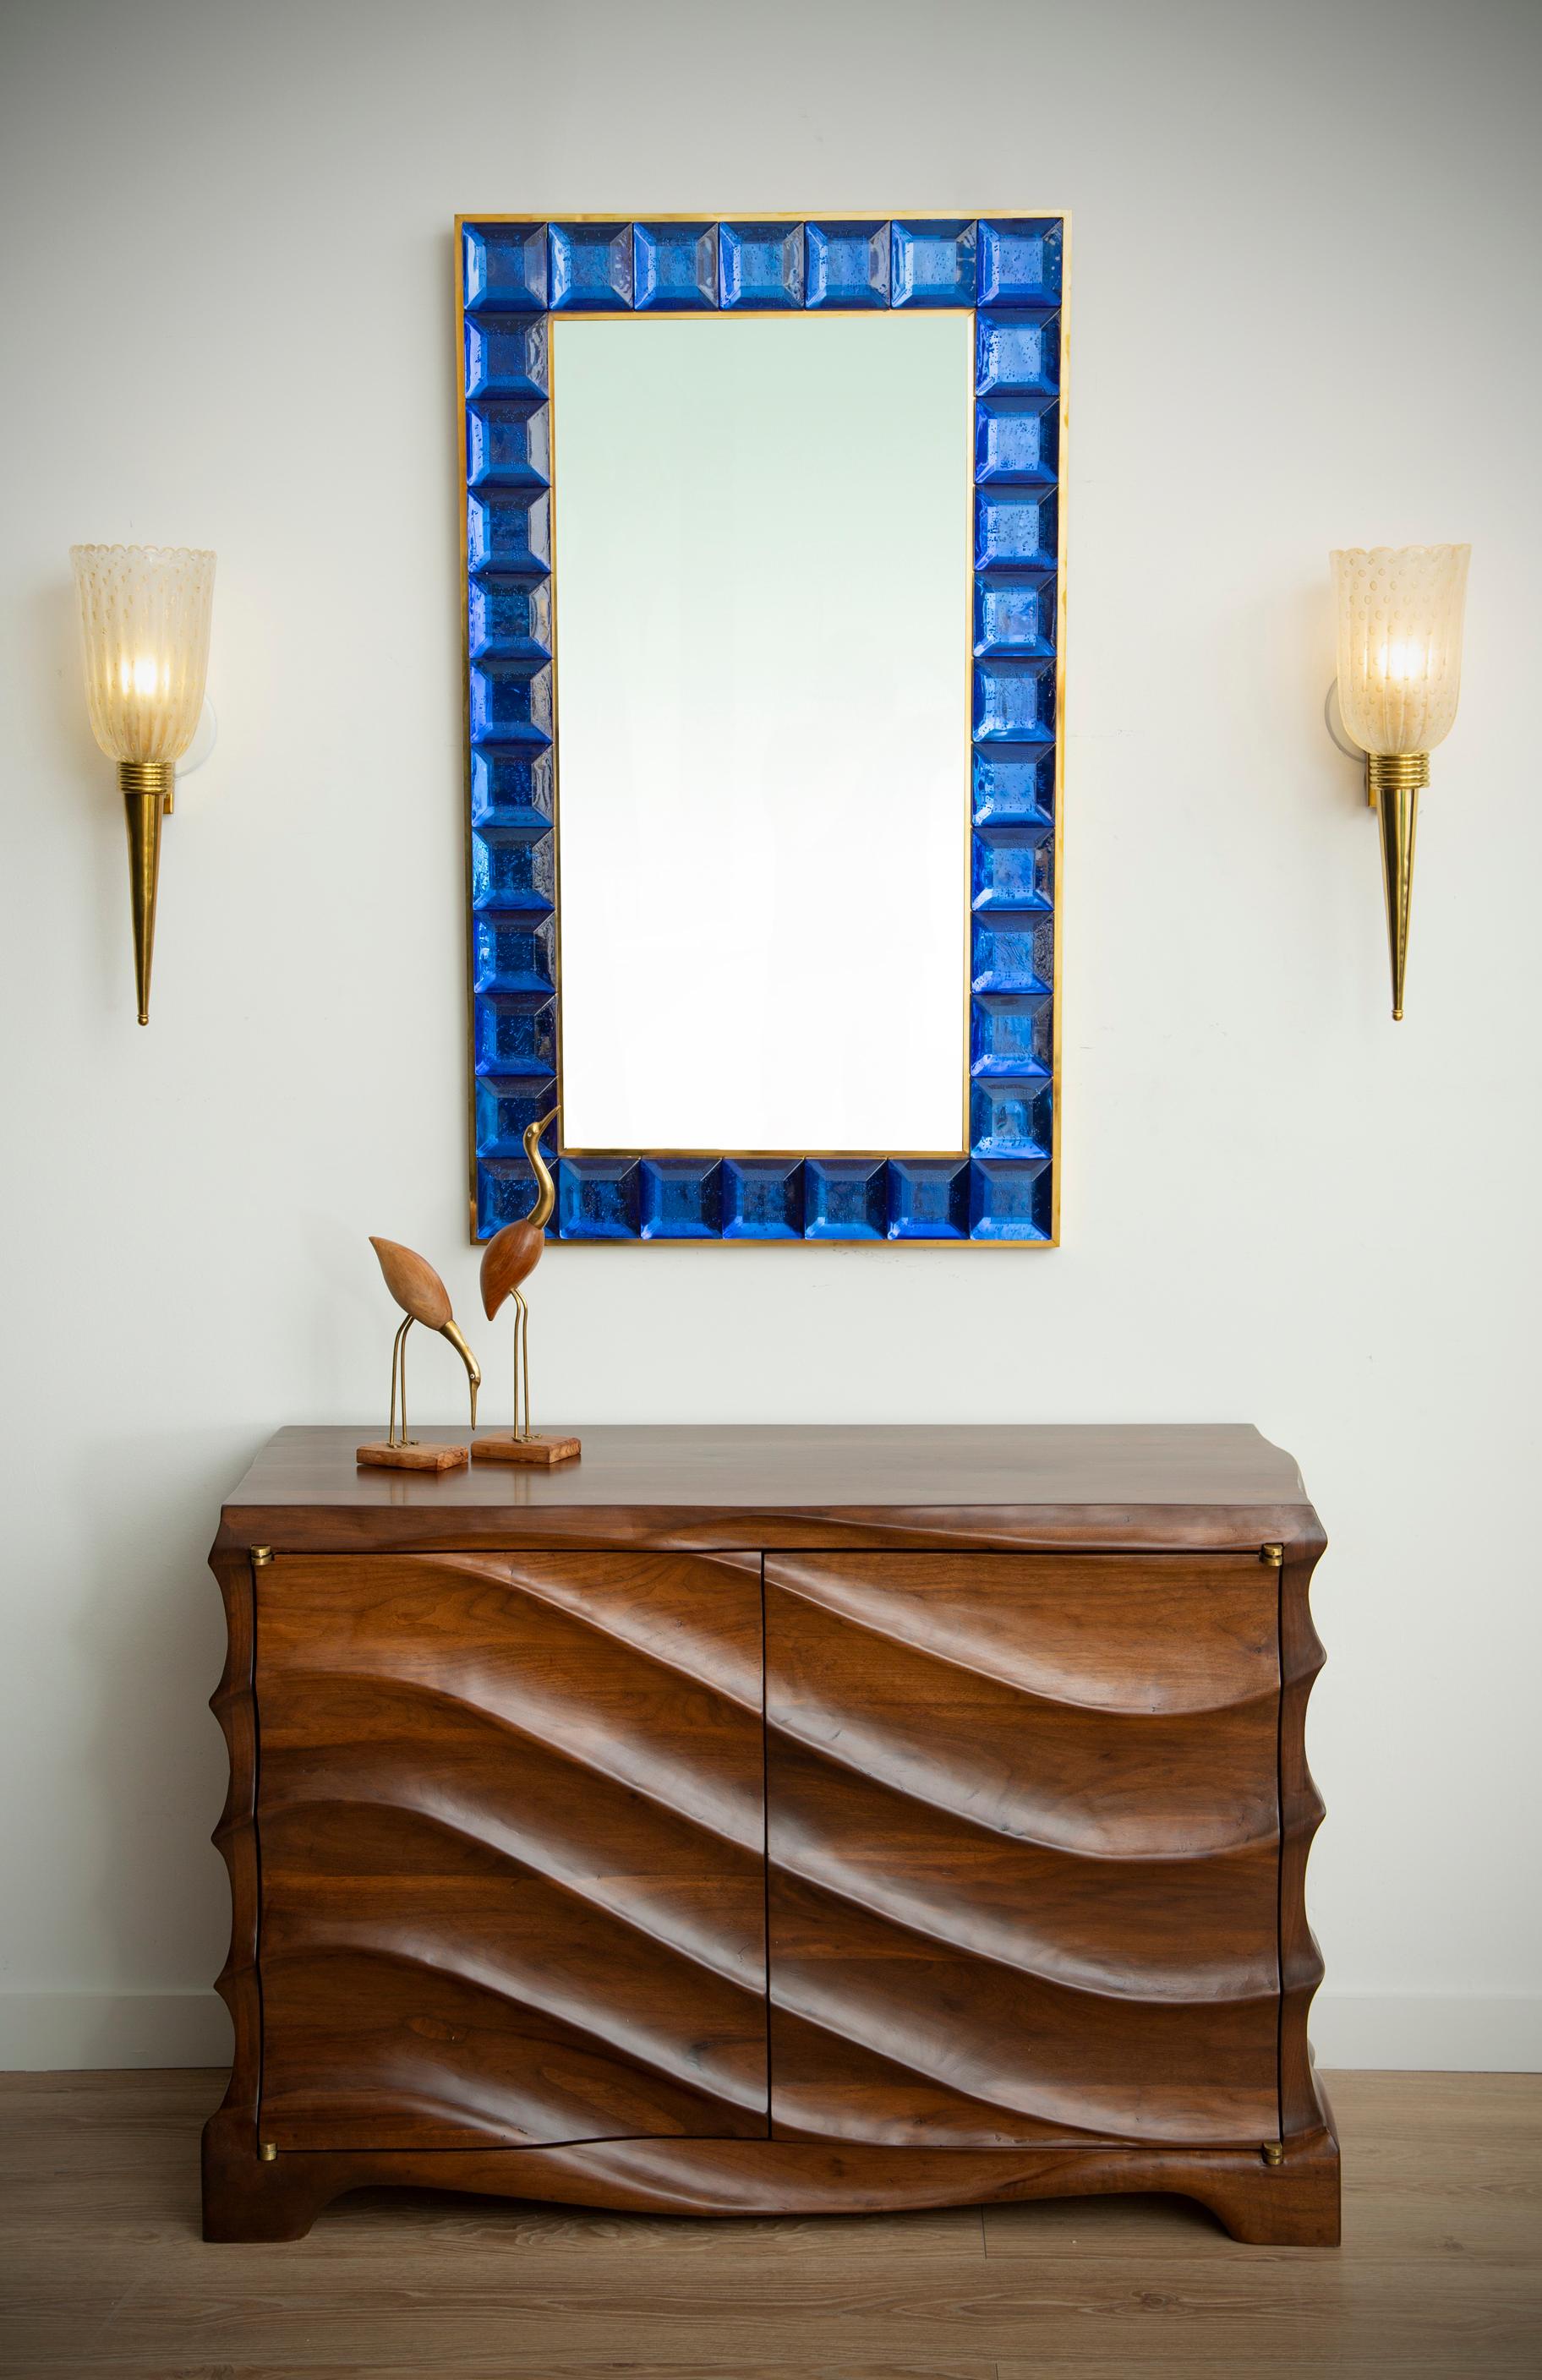 Contemporary cobalt blue square diamond cut Murano glass mirror (2 available), in stock
Vivid and intense cobalt blue glass block with naturally occurring air inclusions throughout 
 Highly polished faceted pattern
 Brass gallery
 Luxury